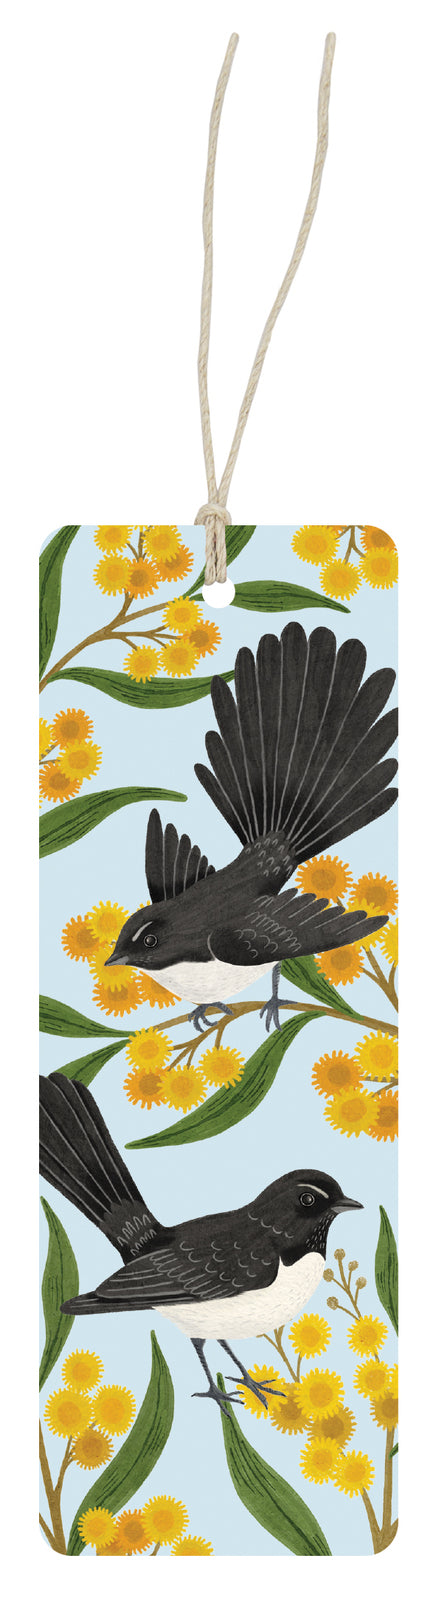 Bookmark | Wagtails &amp; Wattle